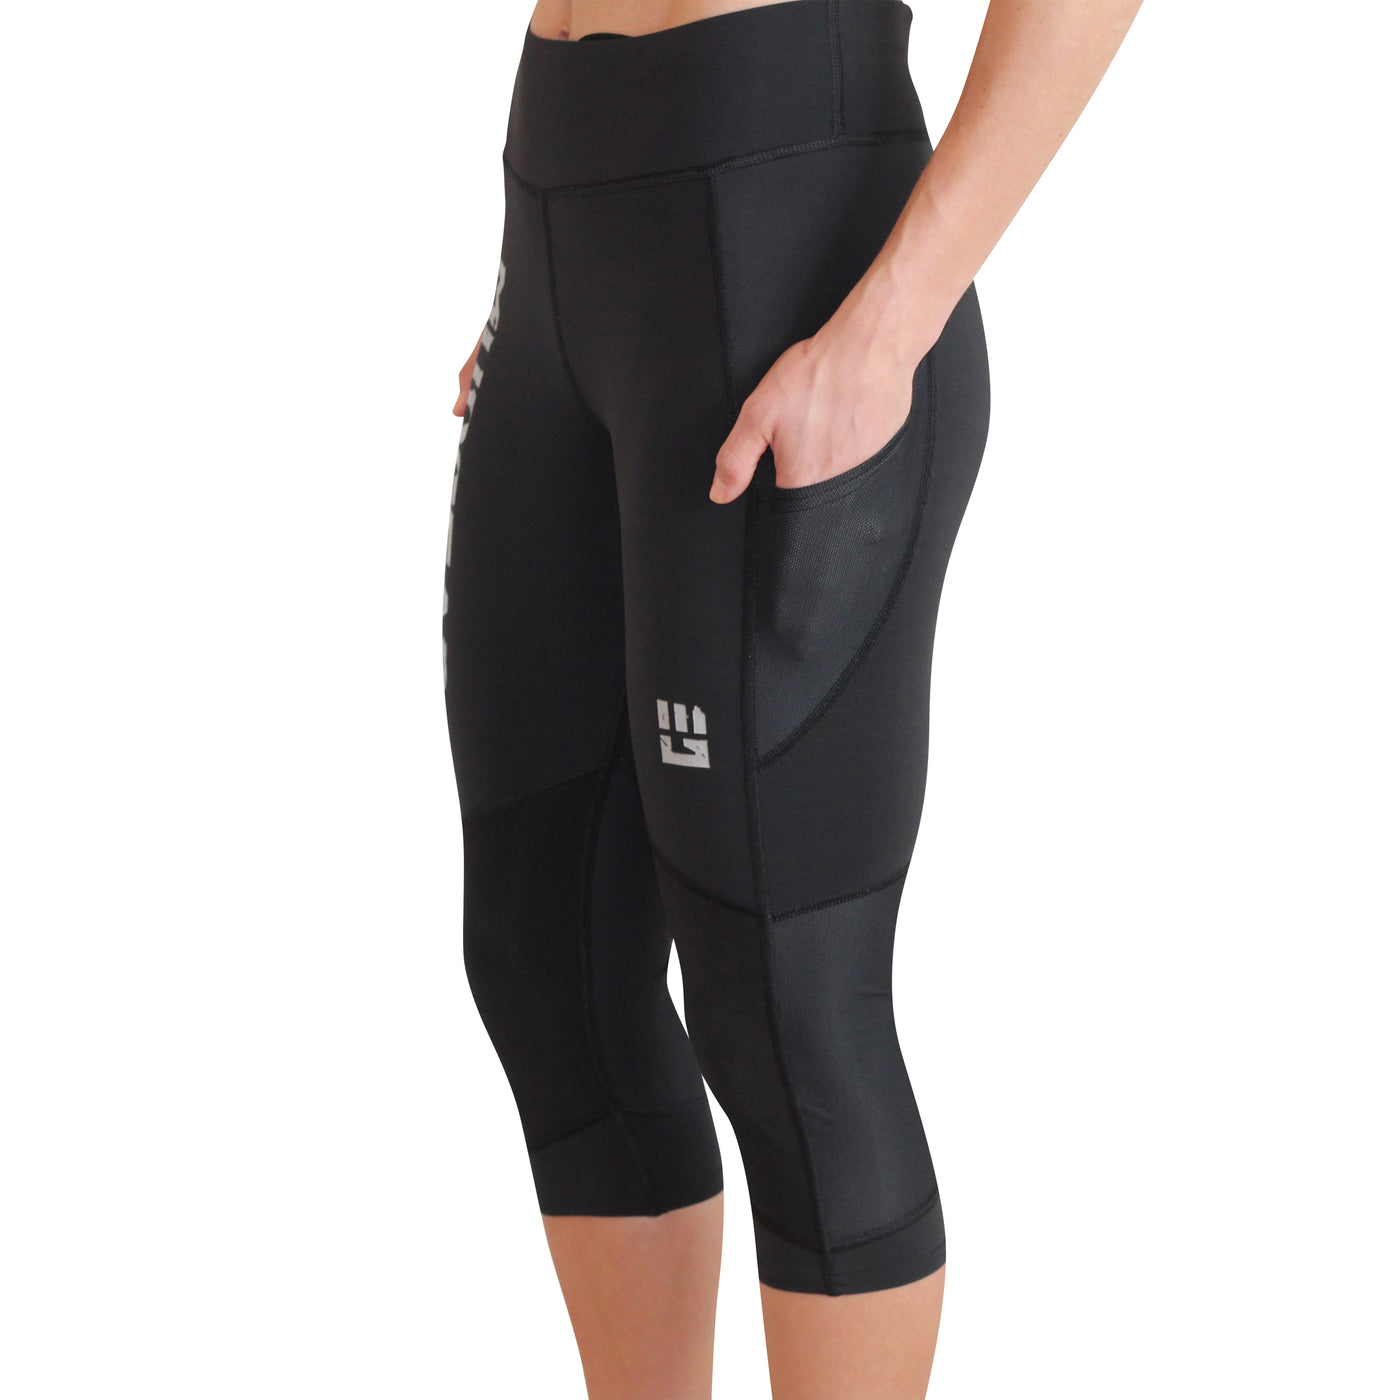 CEP - Our 3/4 Compression Tights give you full compression